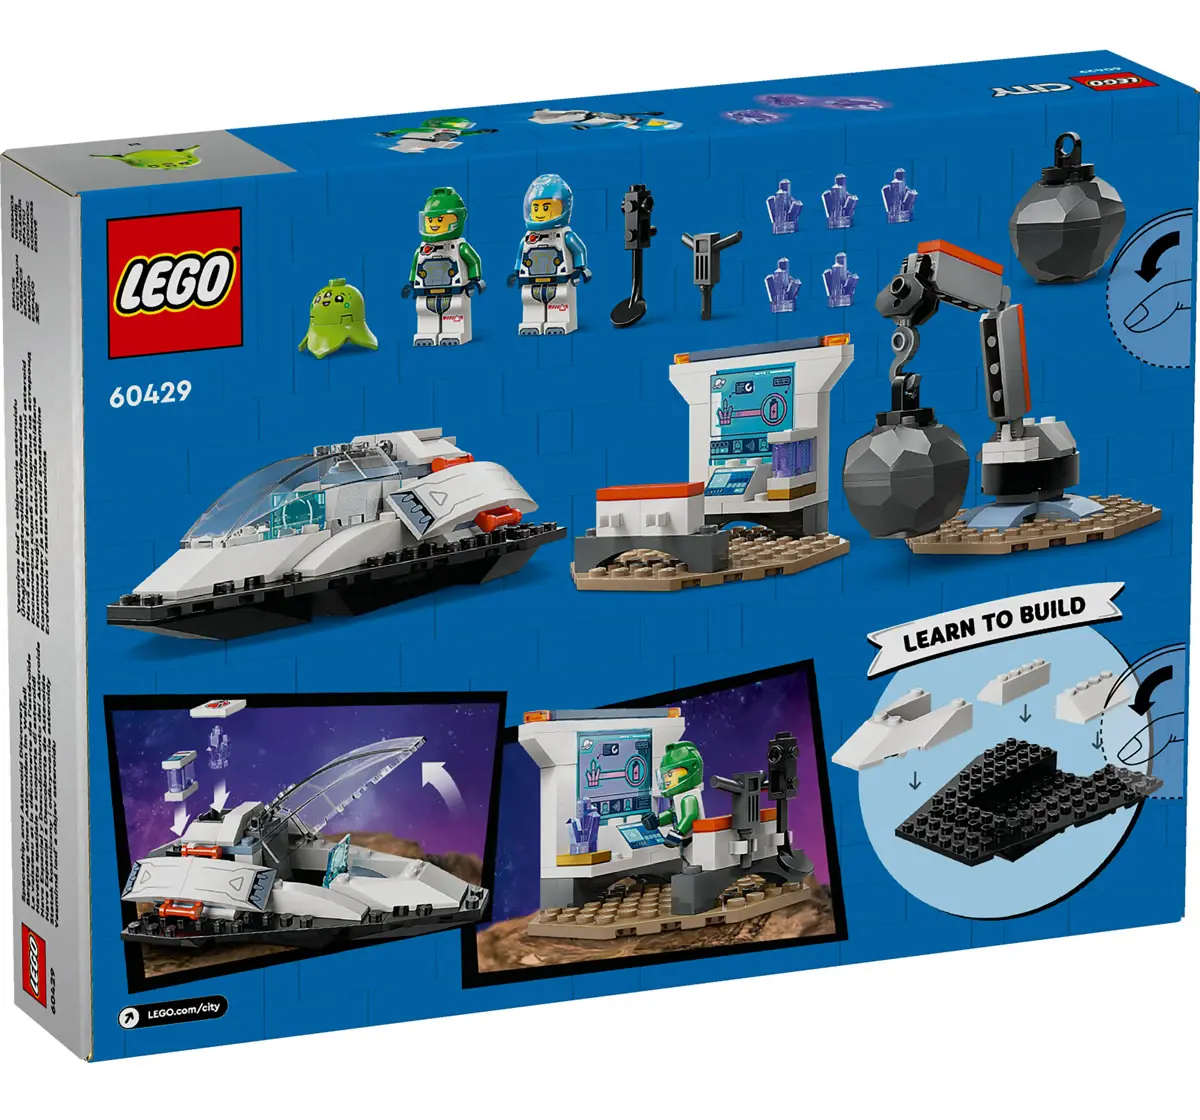 Lego City Spaceship And Asteroid Discovery Set 60429 Multicolour For Kids Ages 4Y+ (126 Pieces)